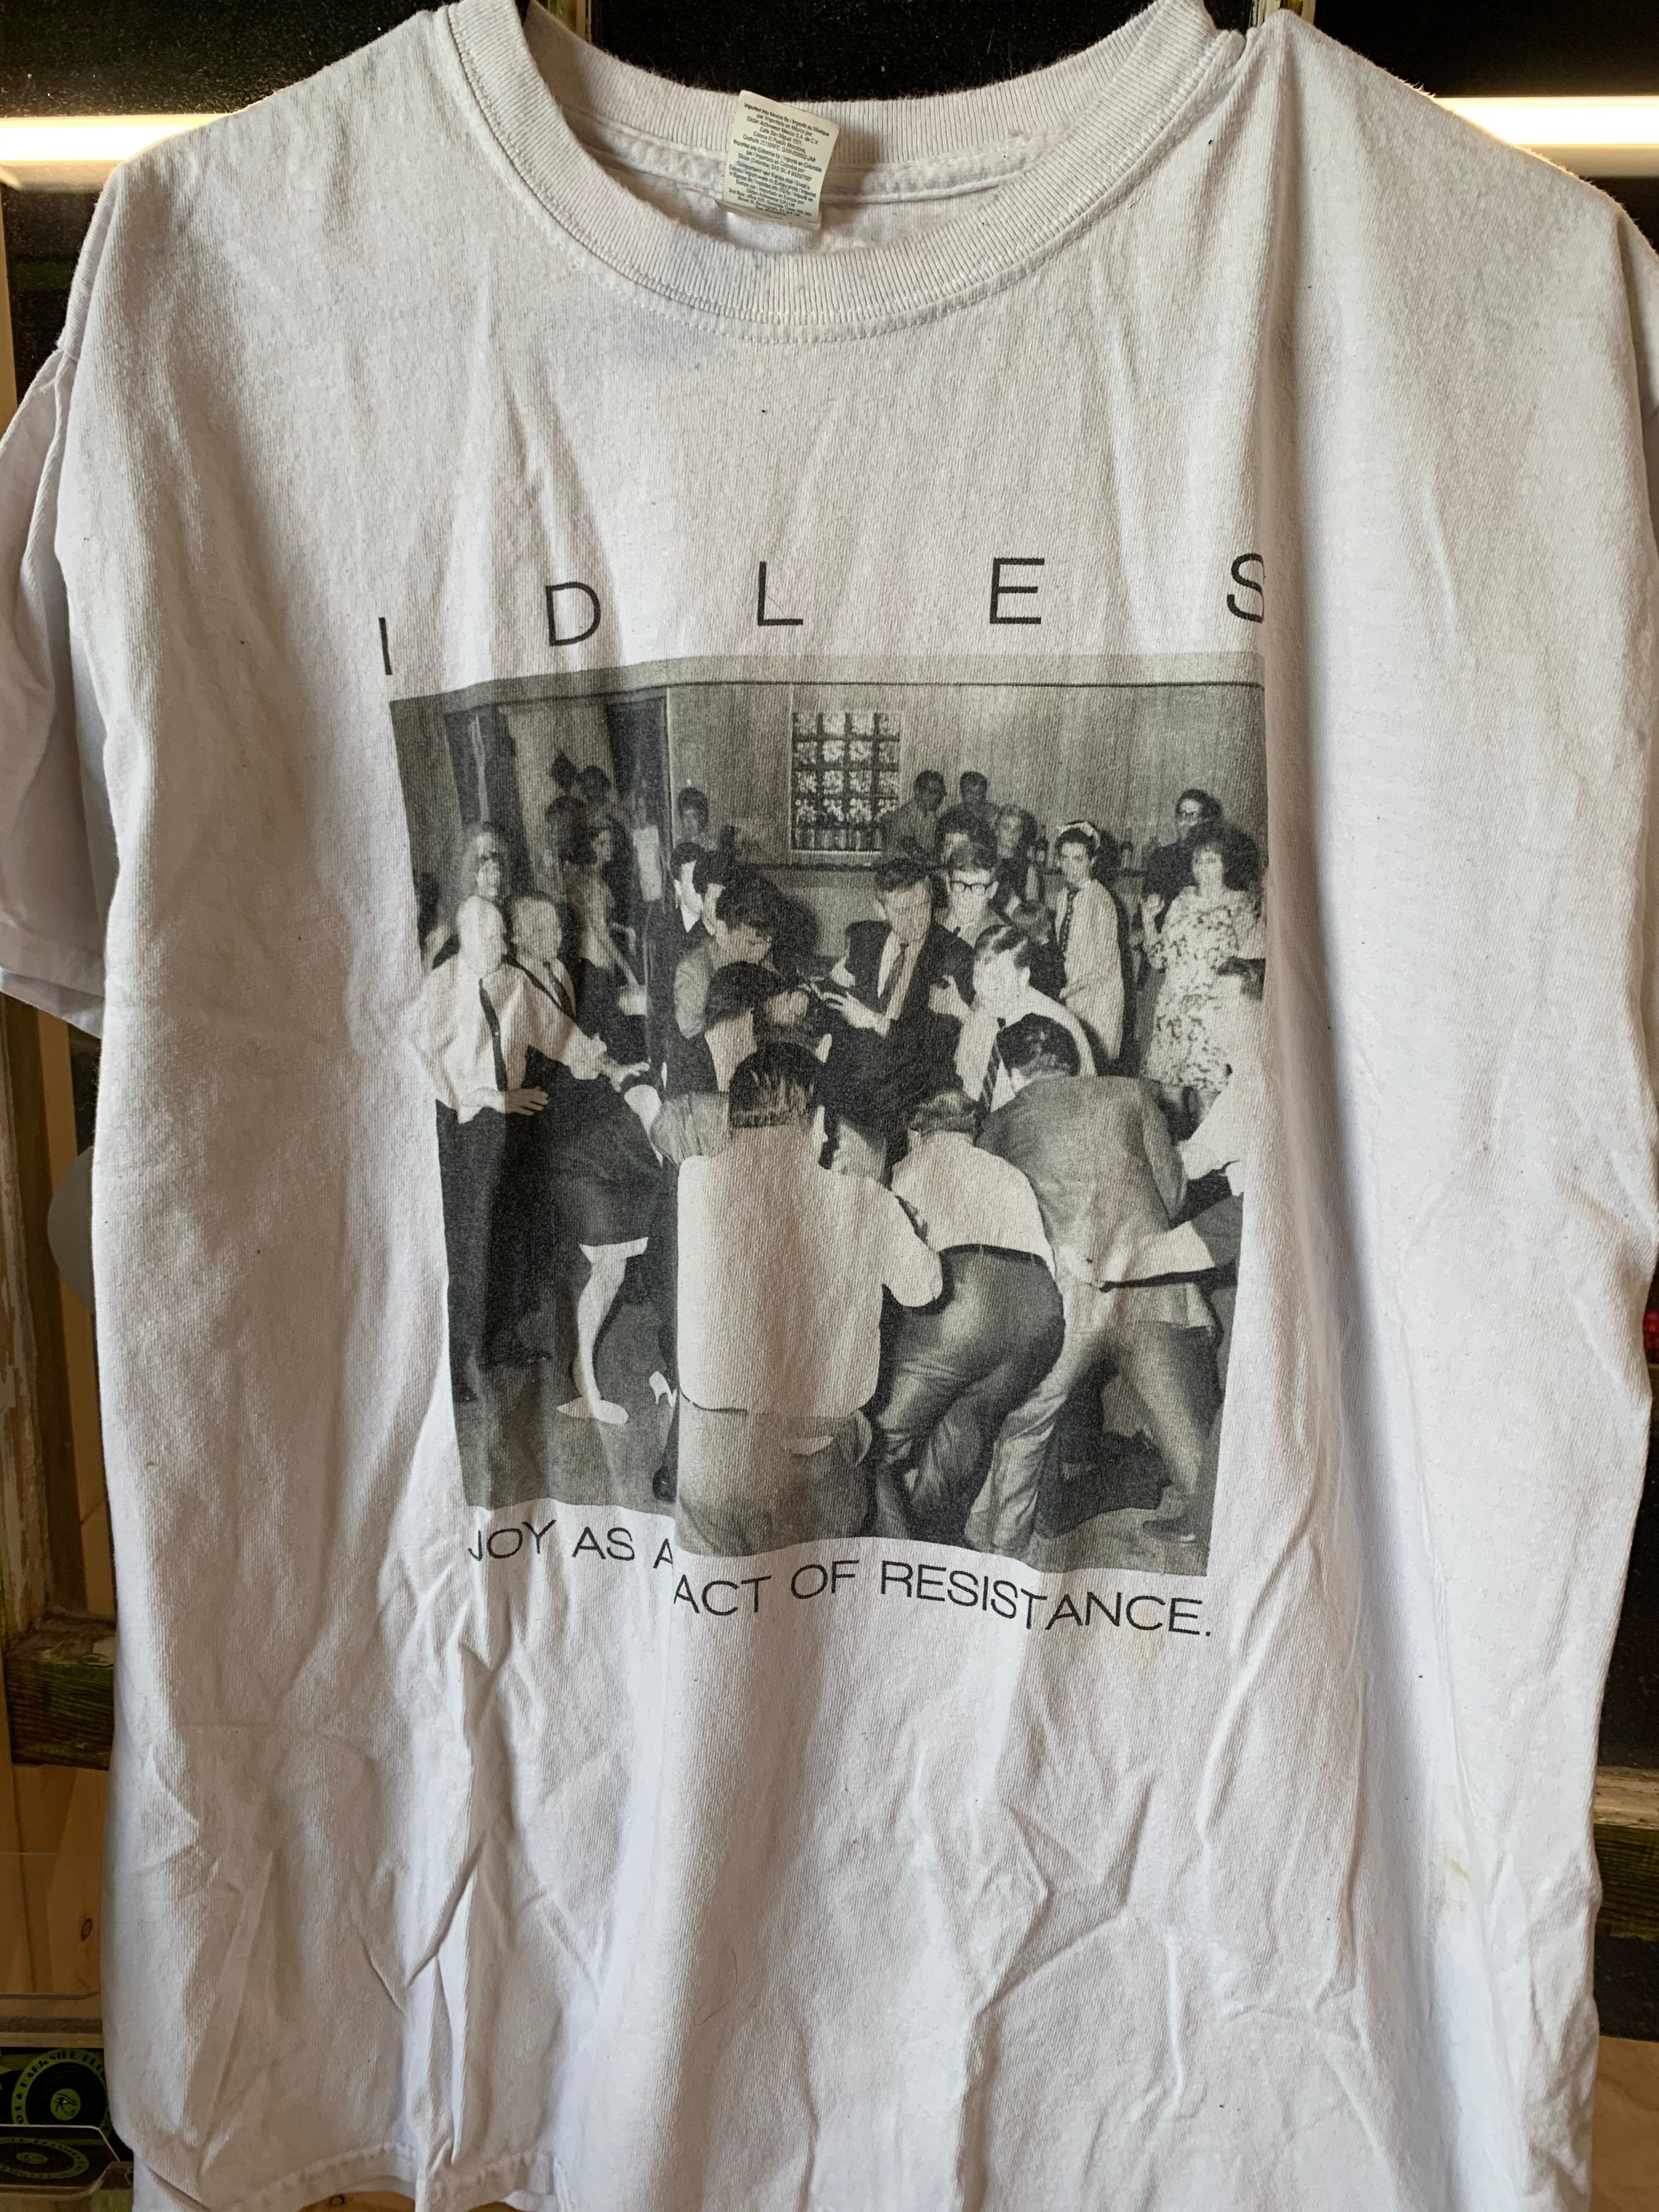 Idles Joy As An Act Of Resistence T-Shirt, White, Large (SEE DESCRIPTION)